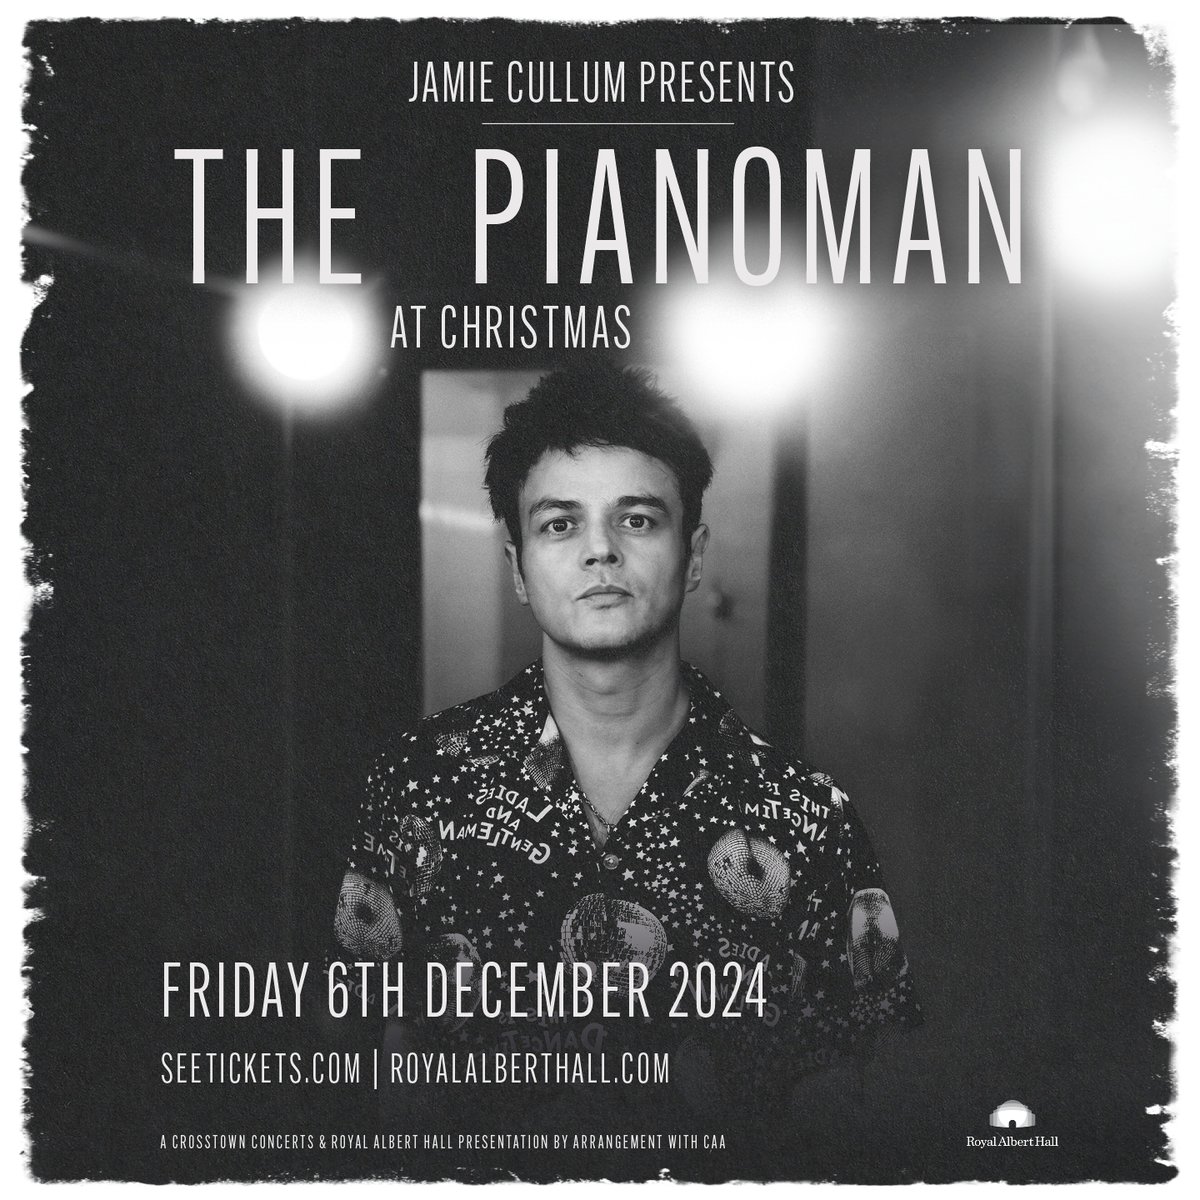 . @jamiecullum plays @RoyalAlbertHall on Friday 6th December. Tickets are on sale Thursday 9th May at 10am: crosstownconcerts.seetickets.com/event/jamie-cu…